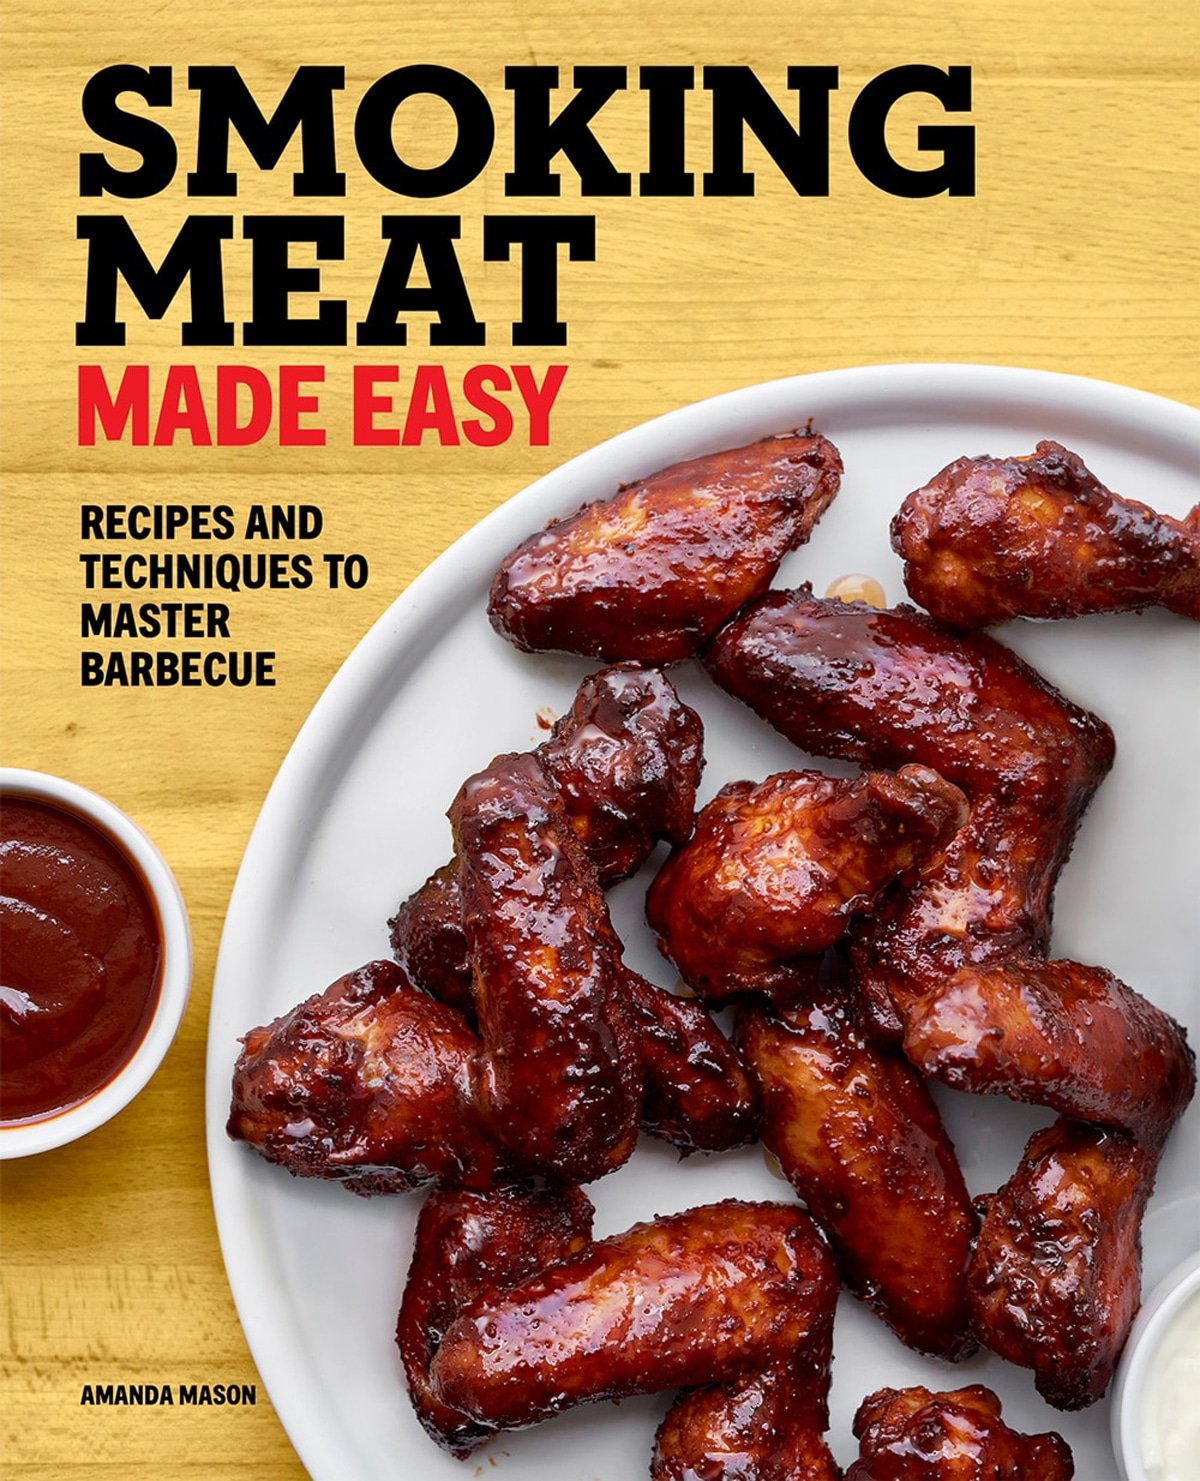 Picture of the cover of a cookbook for smoking meat made easy.